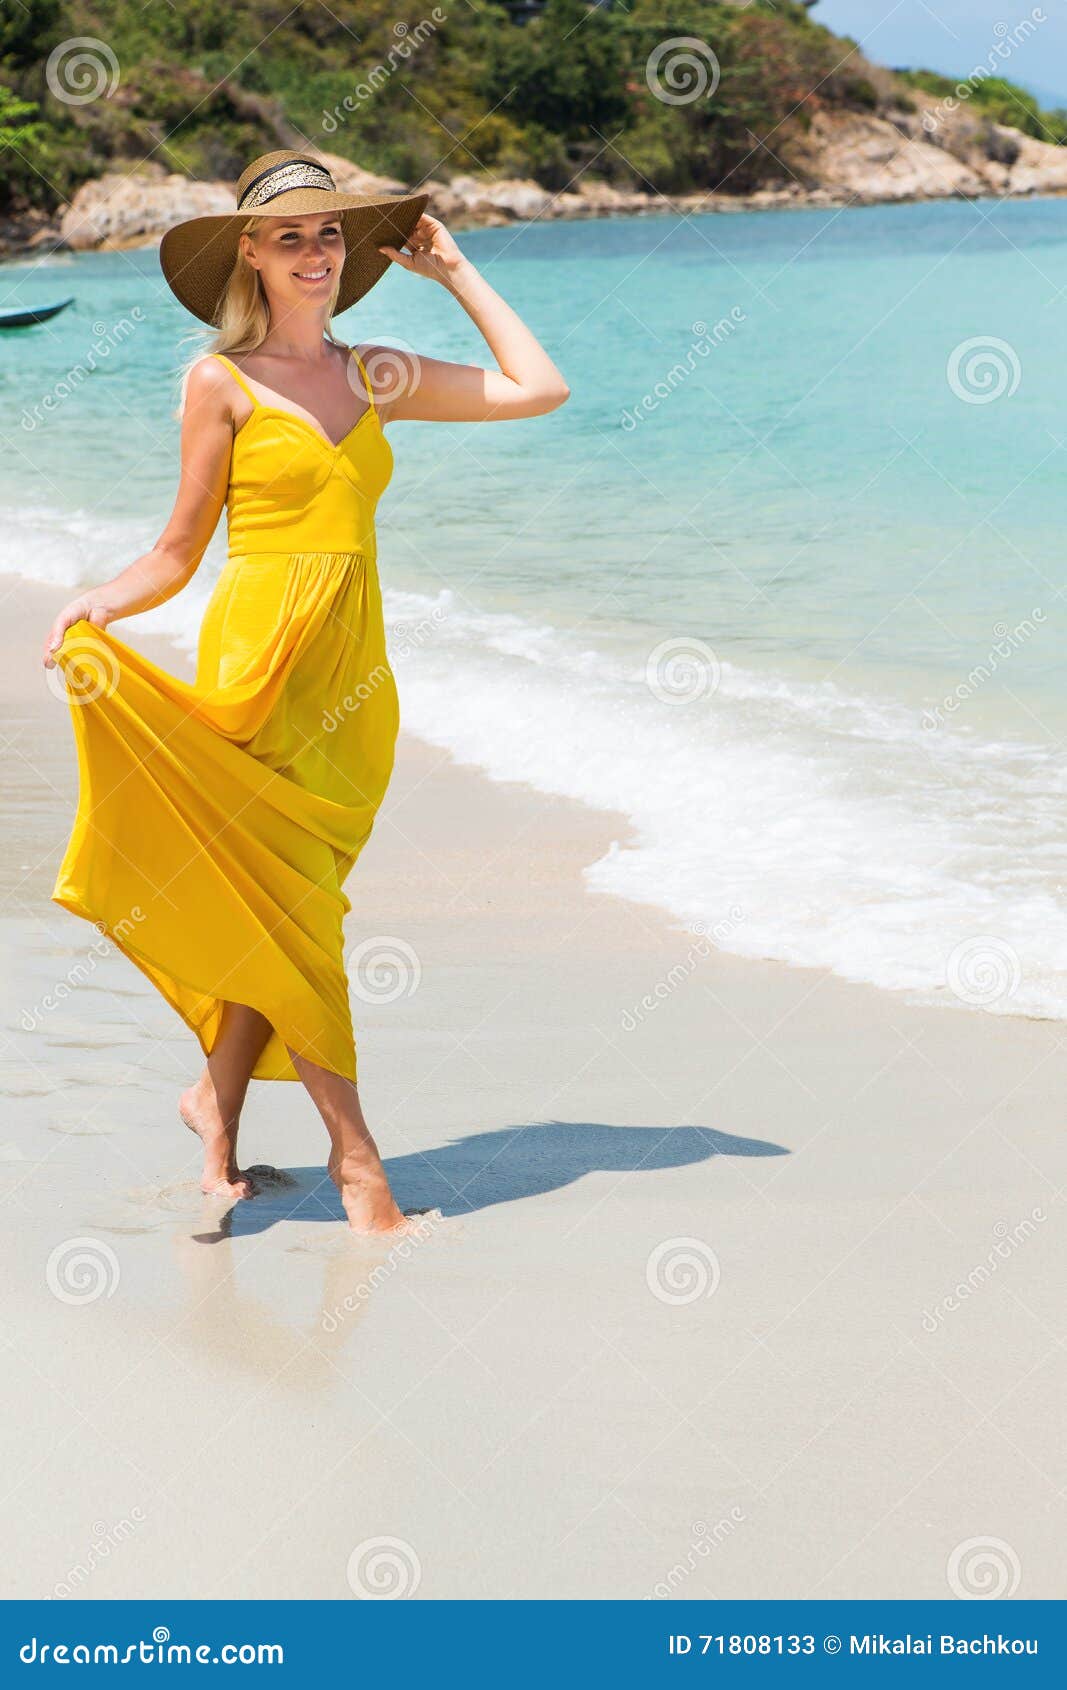 Beautiful Lady on the Beach Stock Image - Image of summer, gown: 71808133